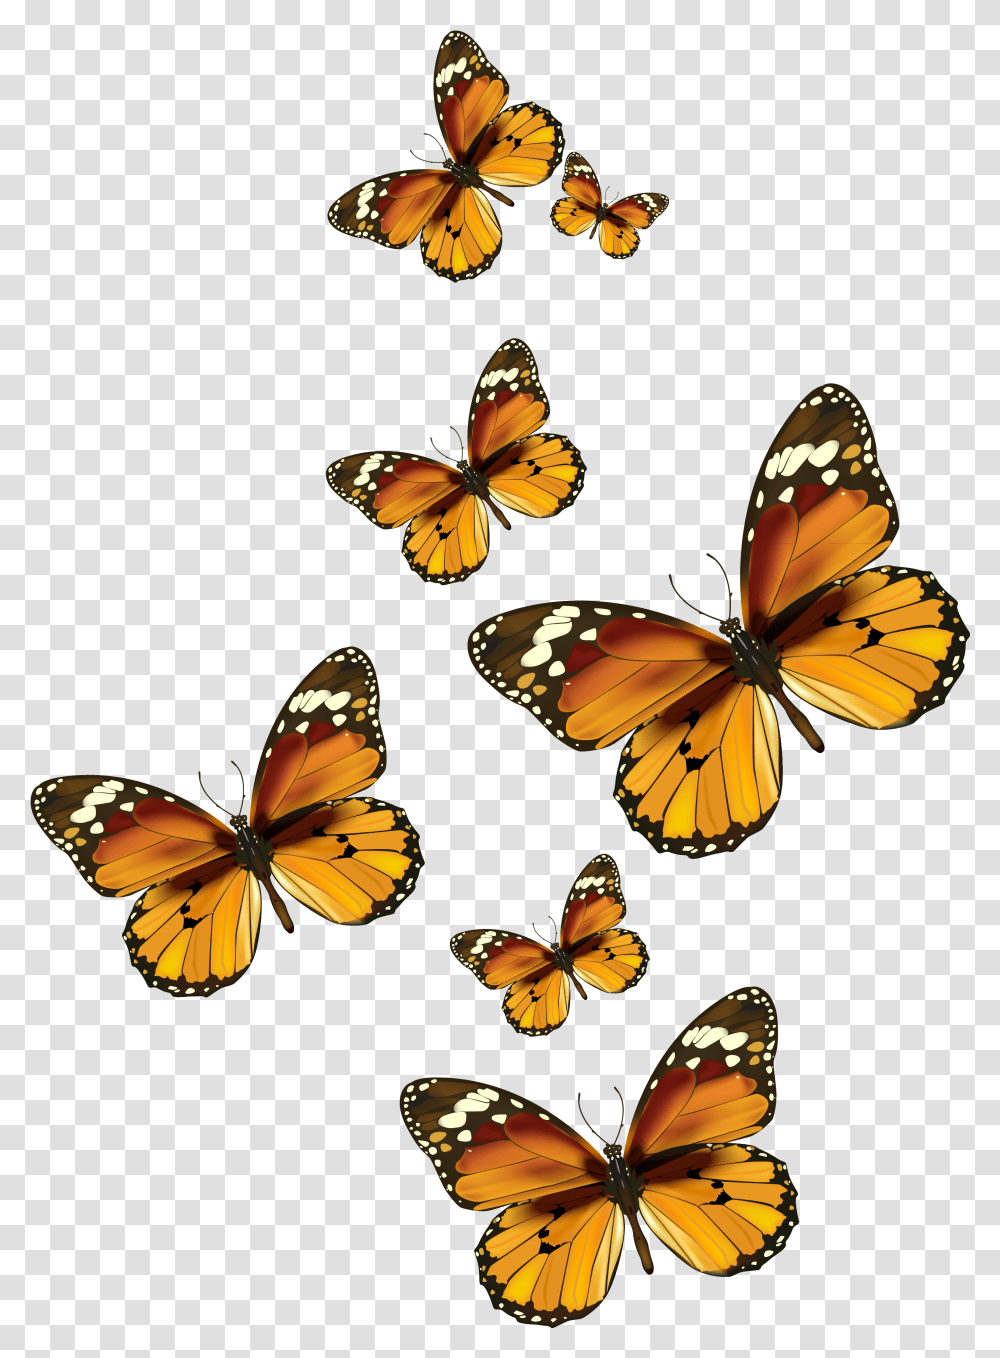 Butterflies Vector Clipart Picture Gallery Painted Lady Butterfly Clip Art, Insect, Invertebrate, Animal, Monarch Transparent Png